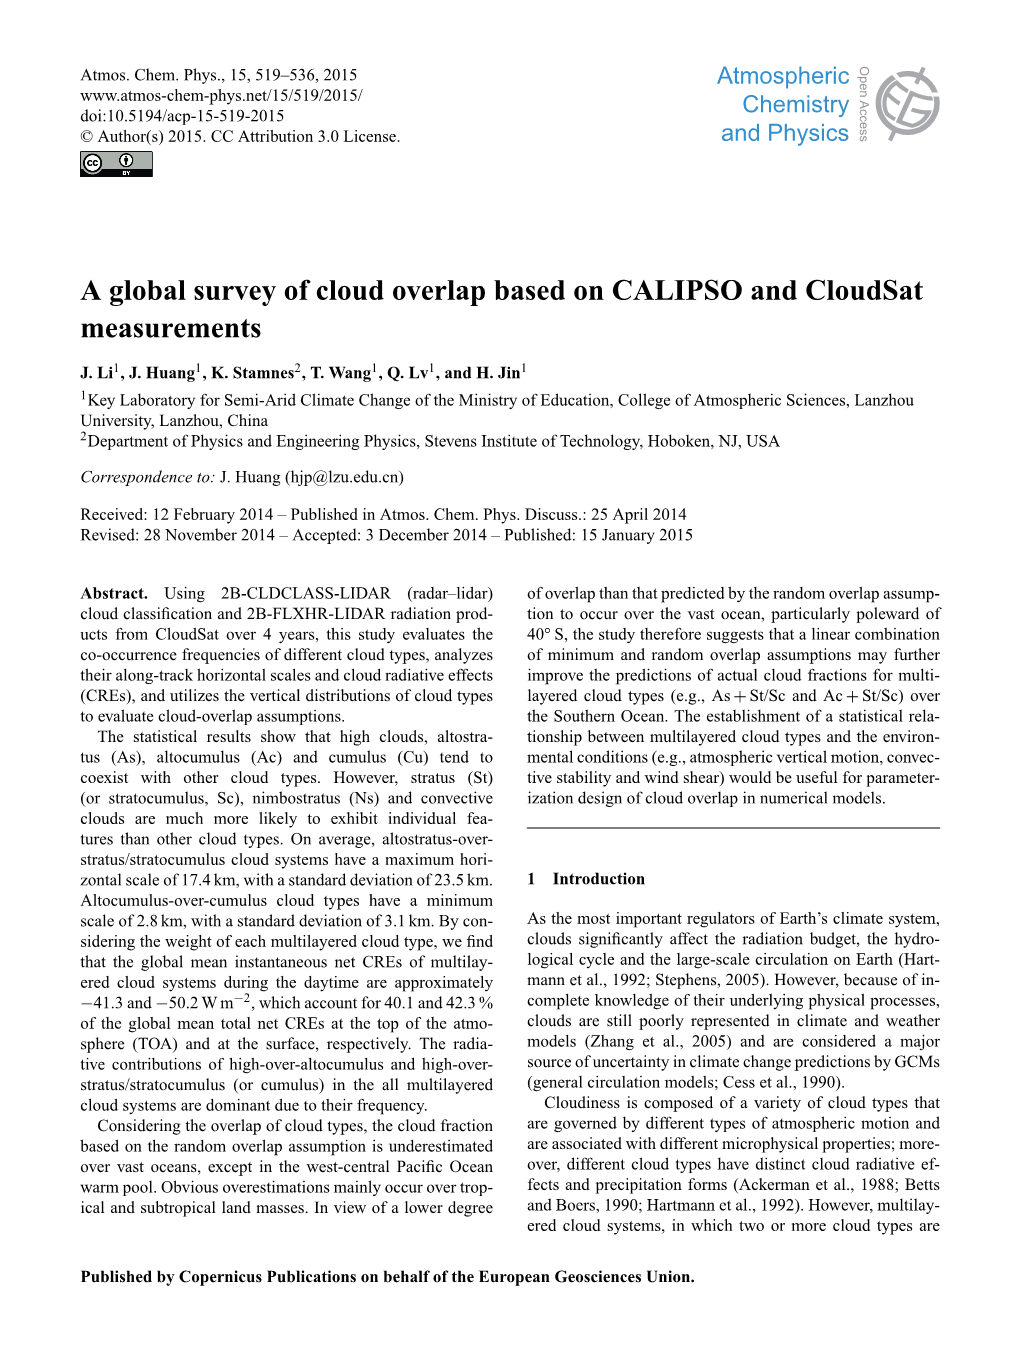 A Global Survey of Cloud Overlap Based on CALIPSO and Cloudsat Measurements